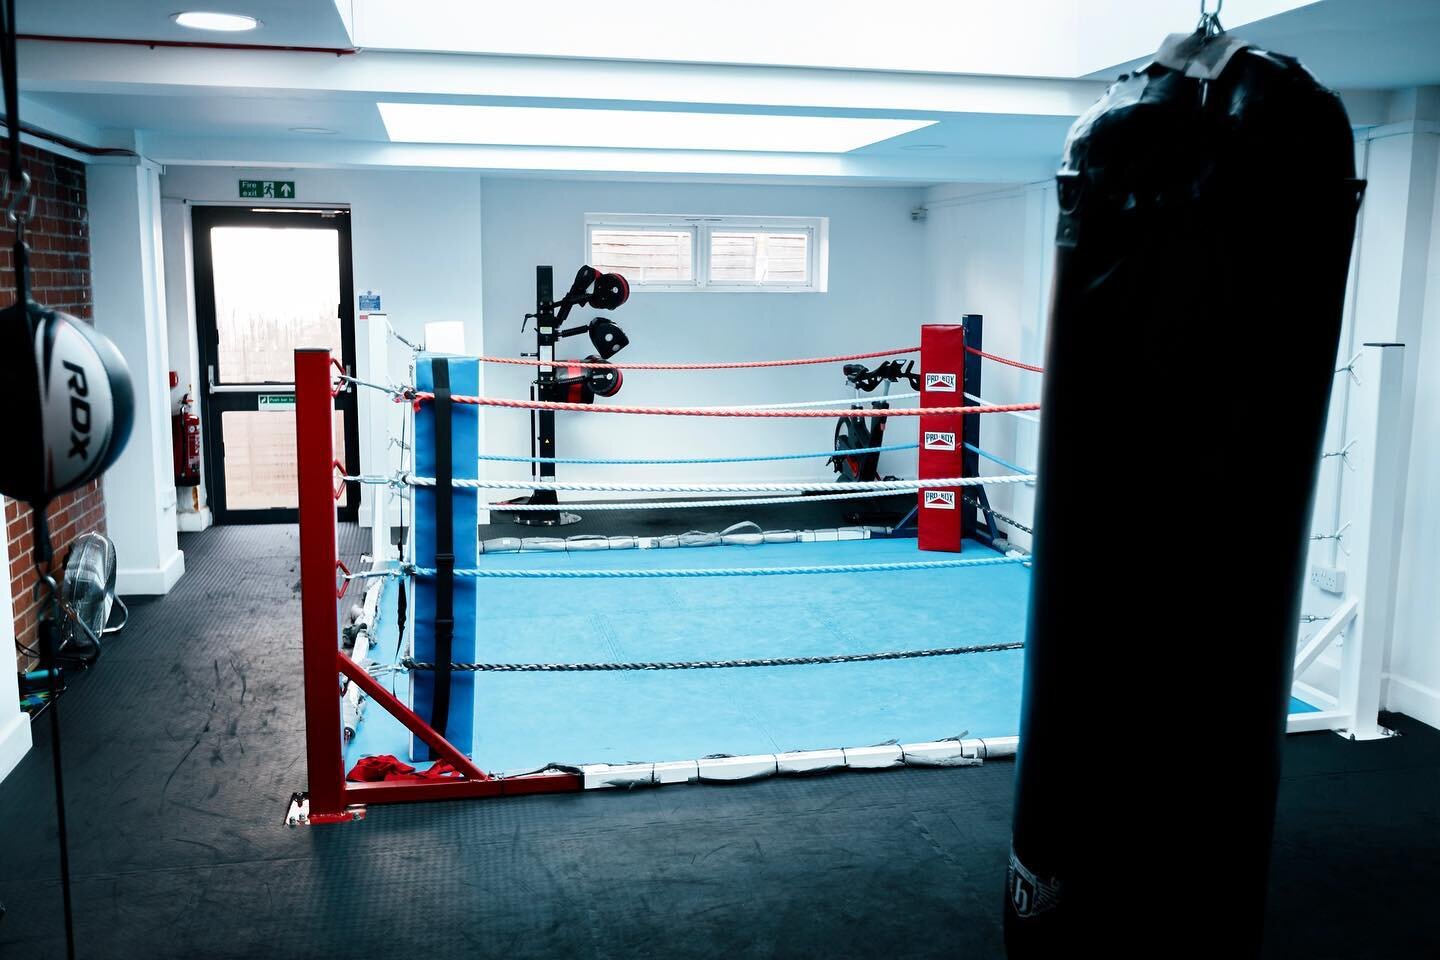 BOXING ROOM @stackhousegym_westcliff Equipped with a floor mounted boxing ring, punch bags, box master and speed ball. Boxing Fitness classes are free to members and &pound;5 for non members. #boxing #combat #boxmaster @stackhousegym